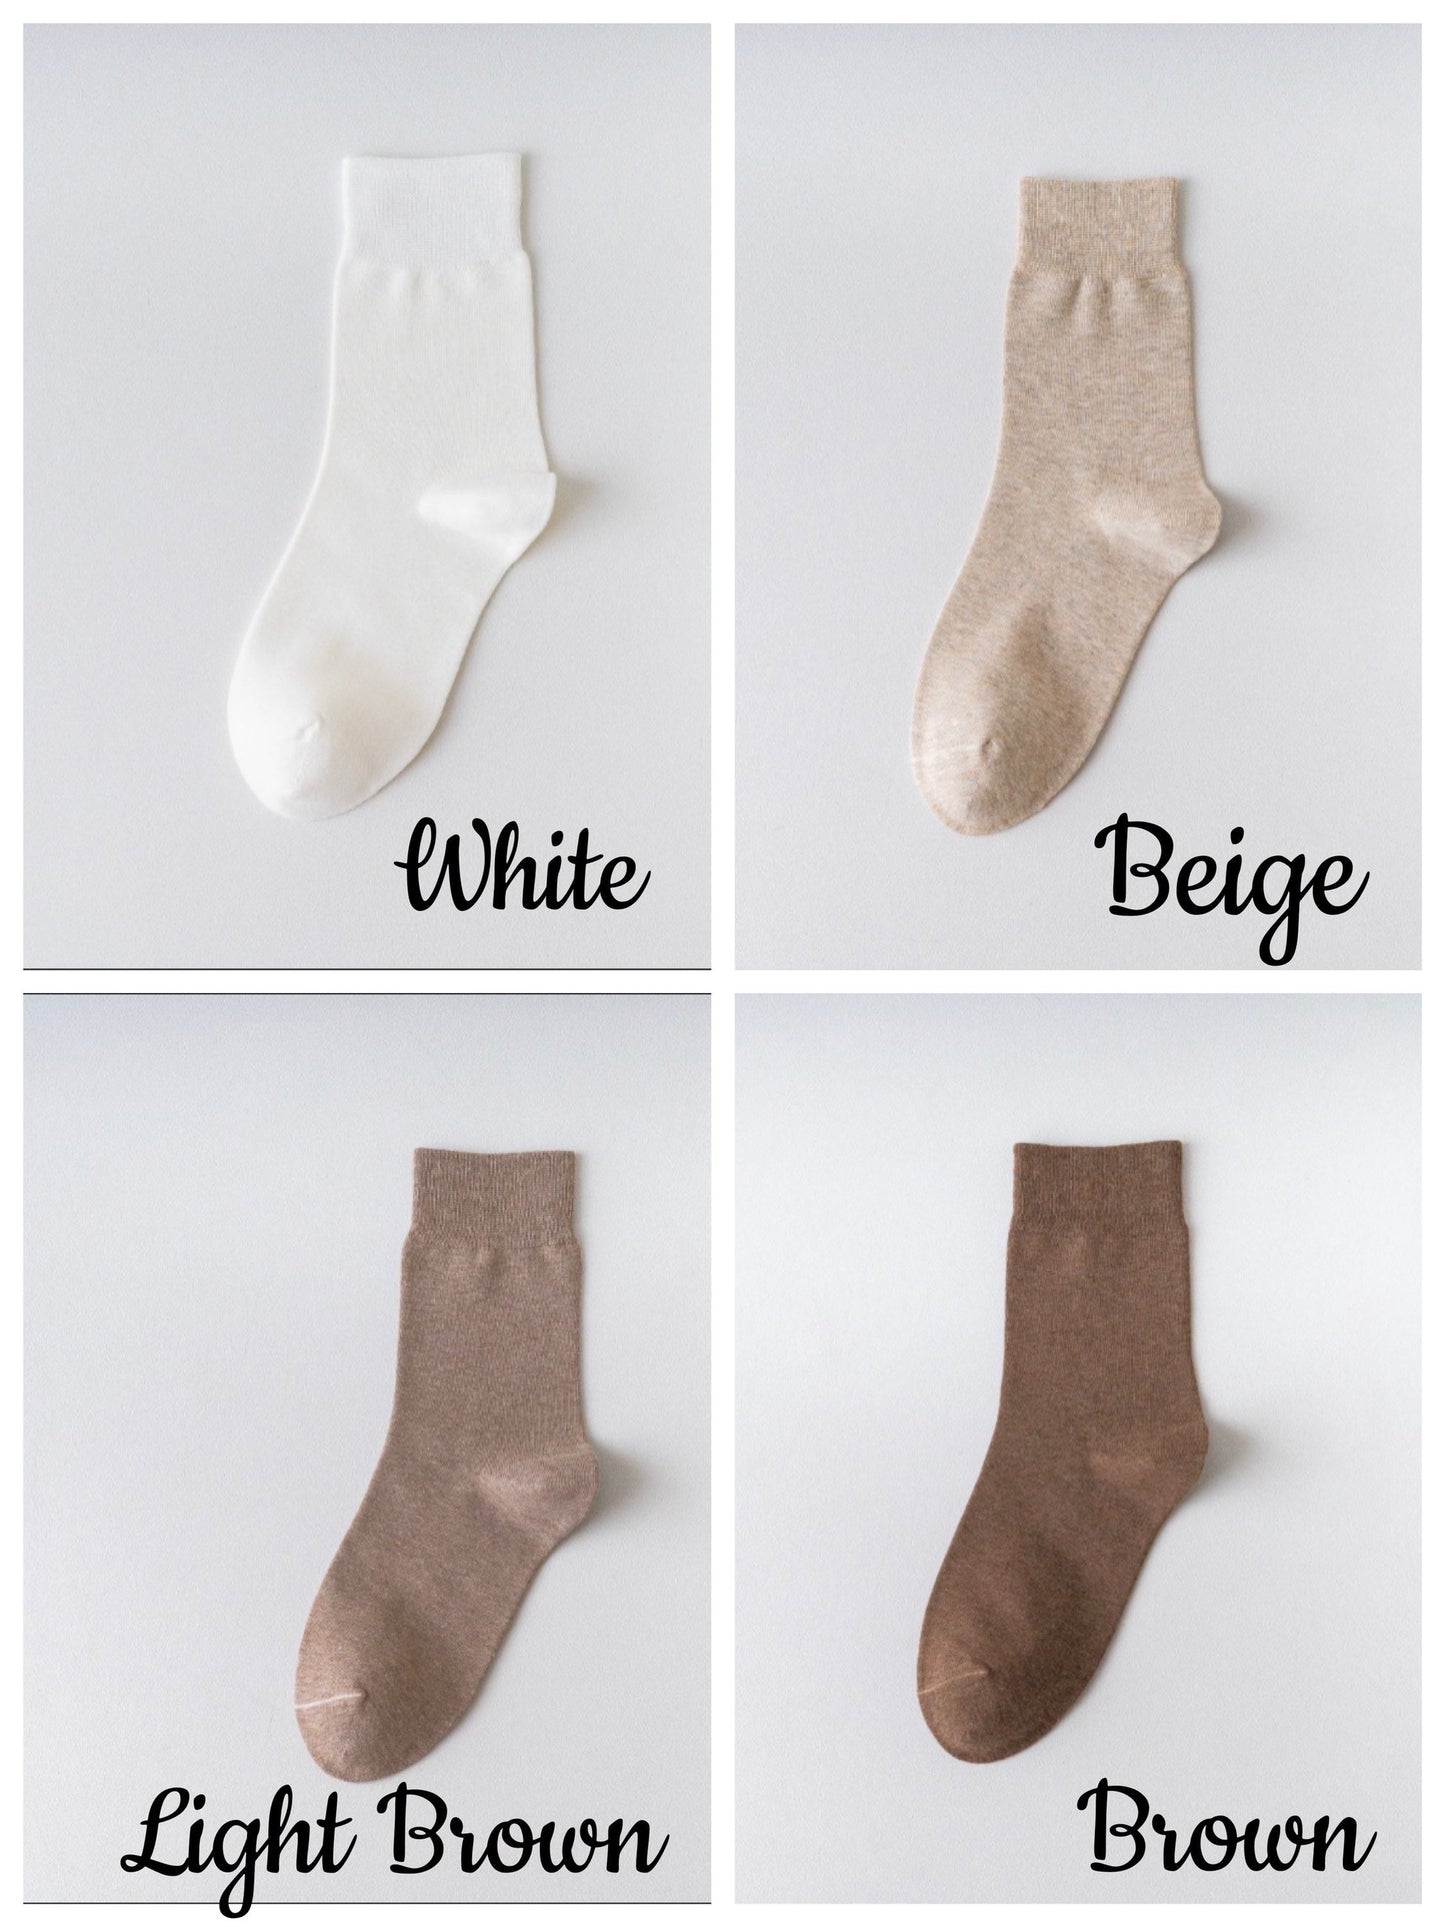 Miss June’s | Men’s | 1 pair 98% Cotton socks | Daily | Natural | Soft | Designed | Solid color | Gift Idea | Casual | Stylish | Comfortable